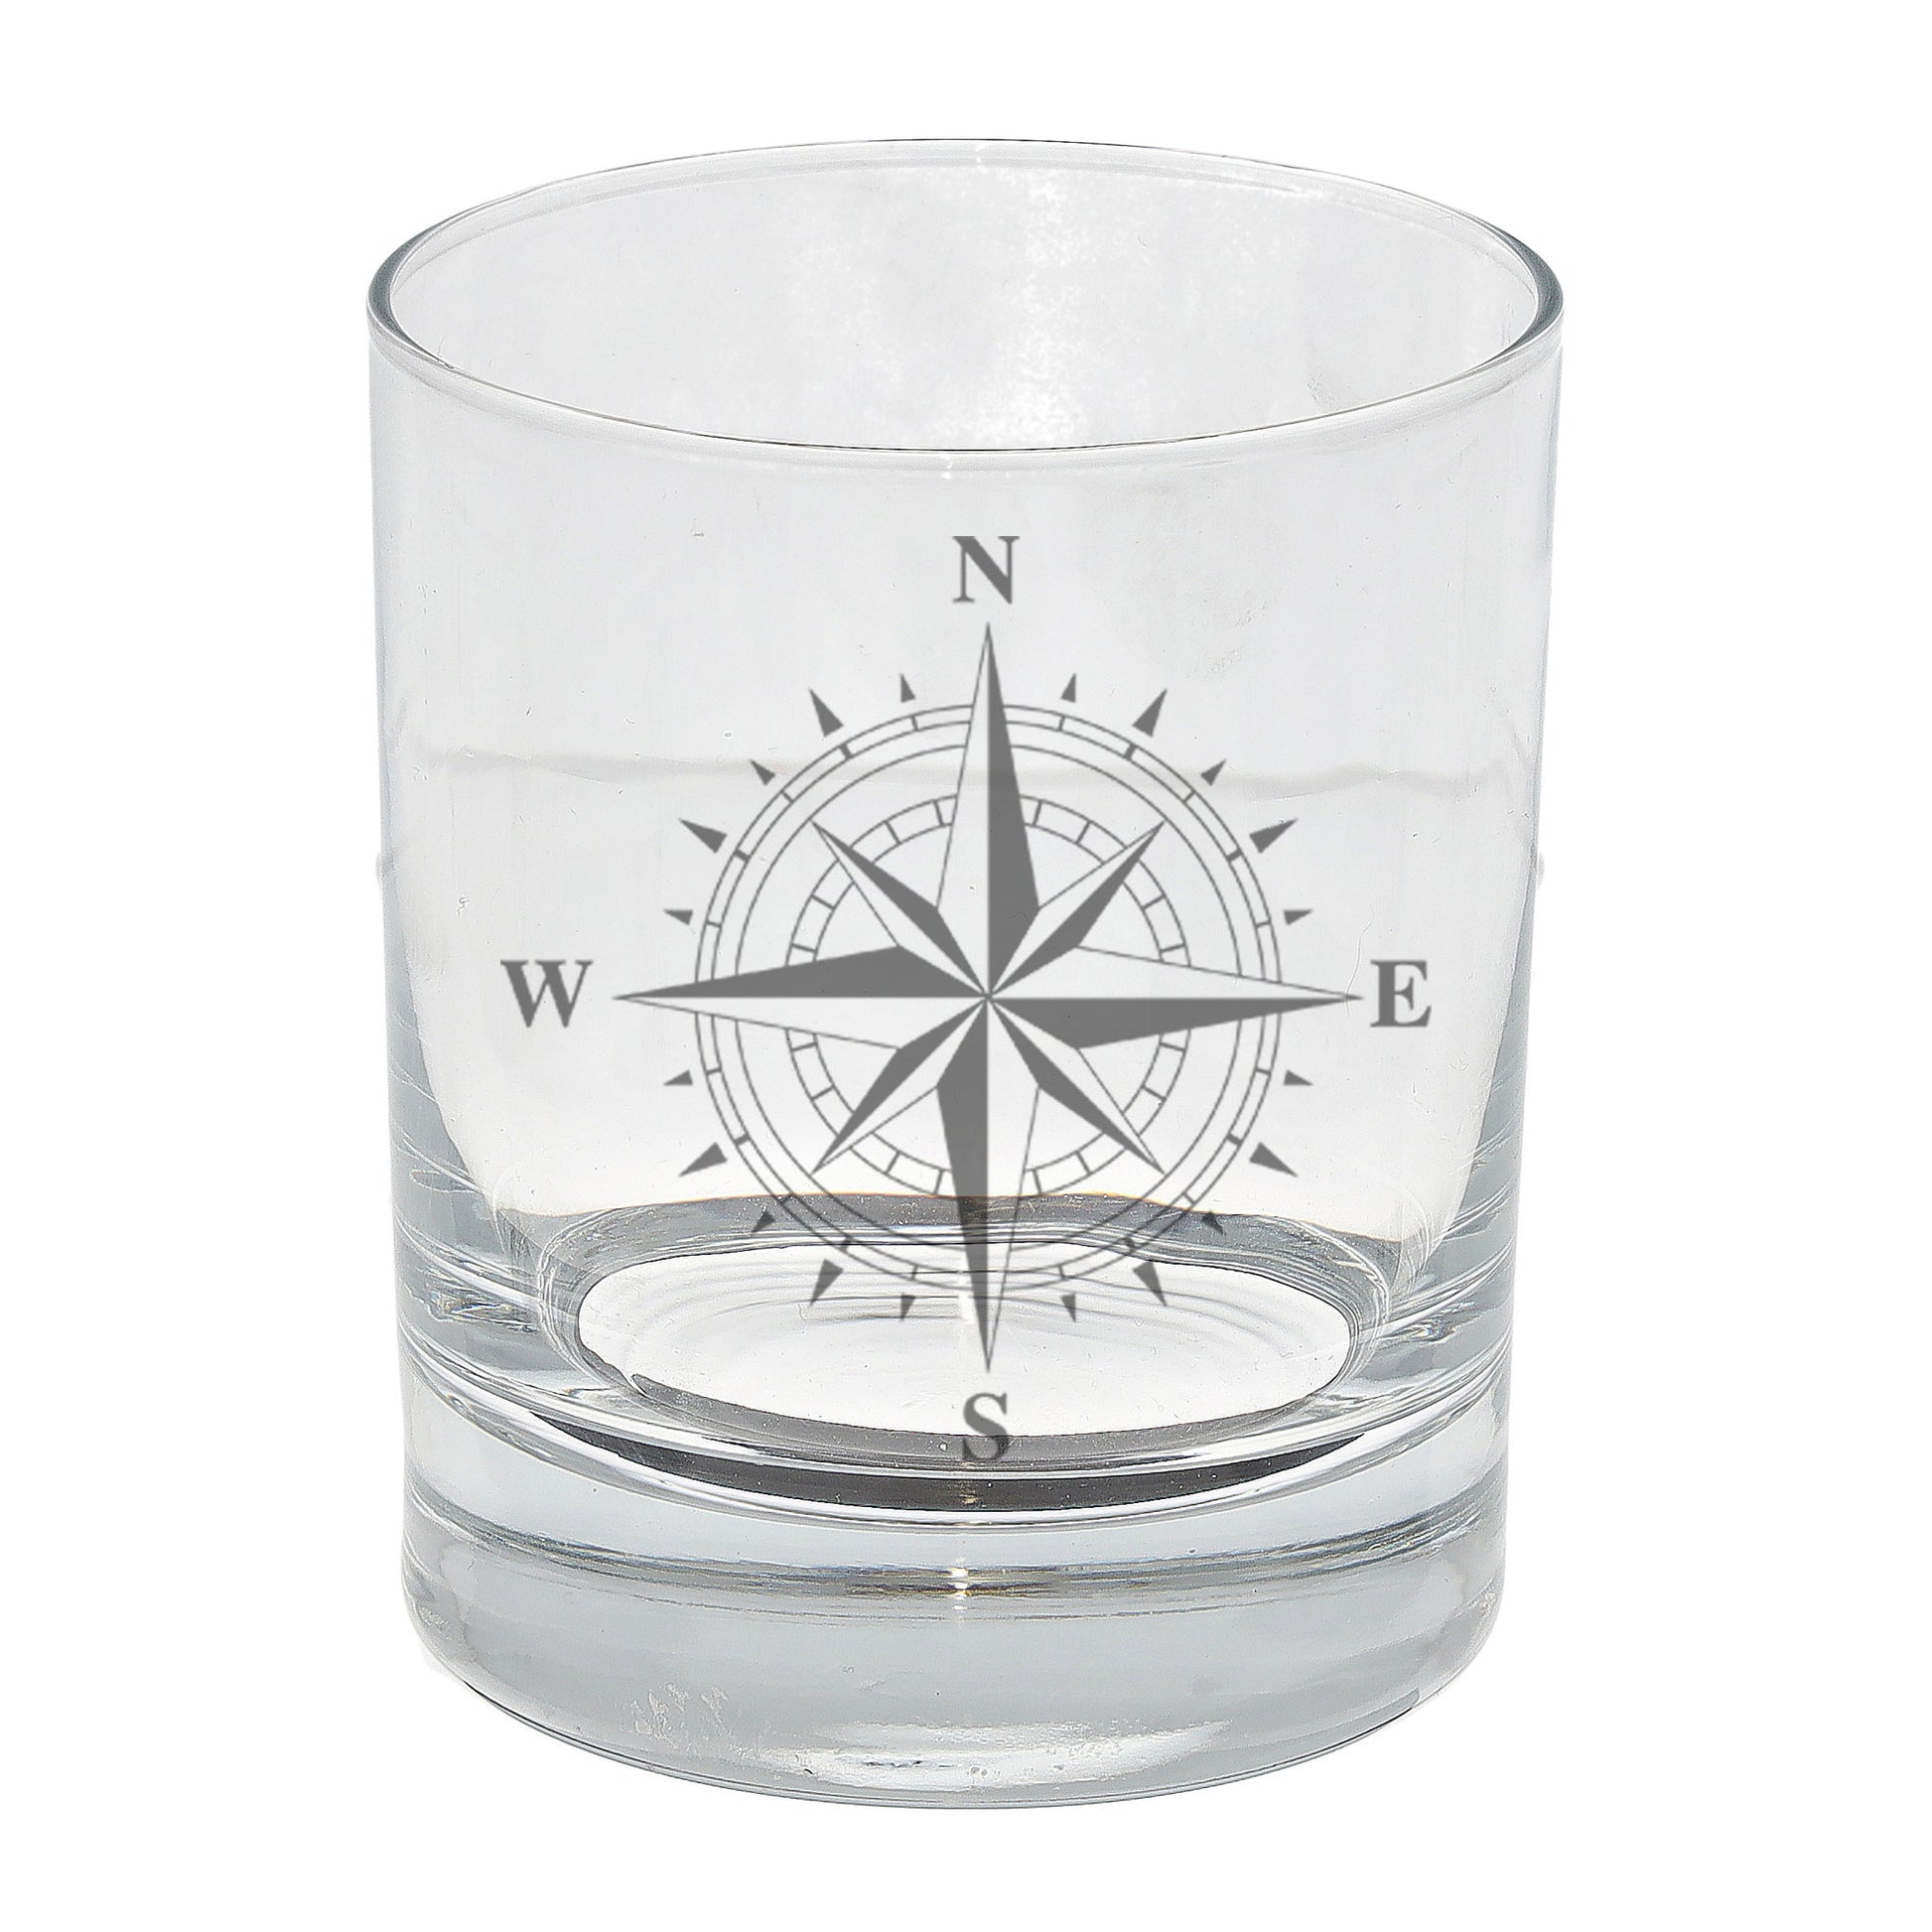 Compass Engraved Whisky Glass and/or Coaster Set  - Always Looking Good - Whisky Glass Only  